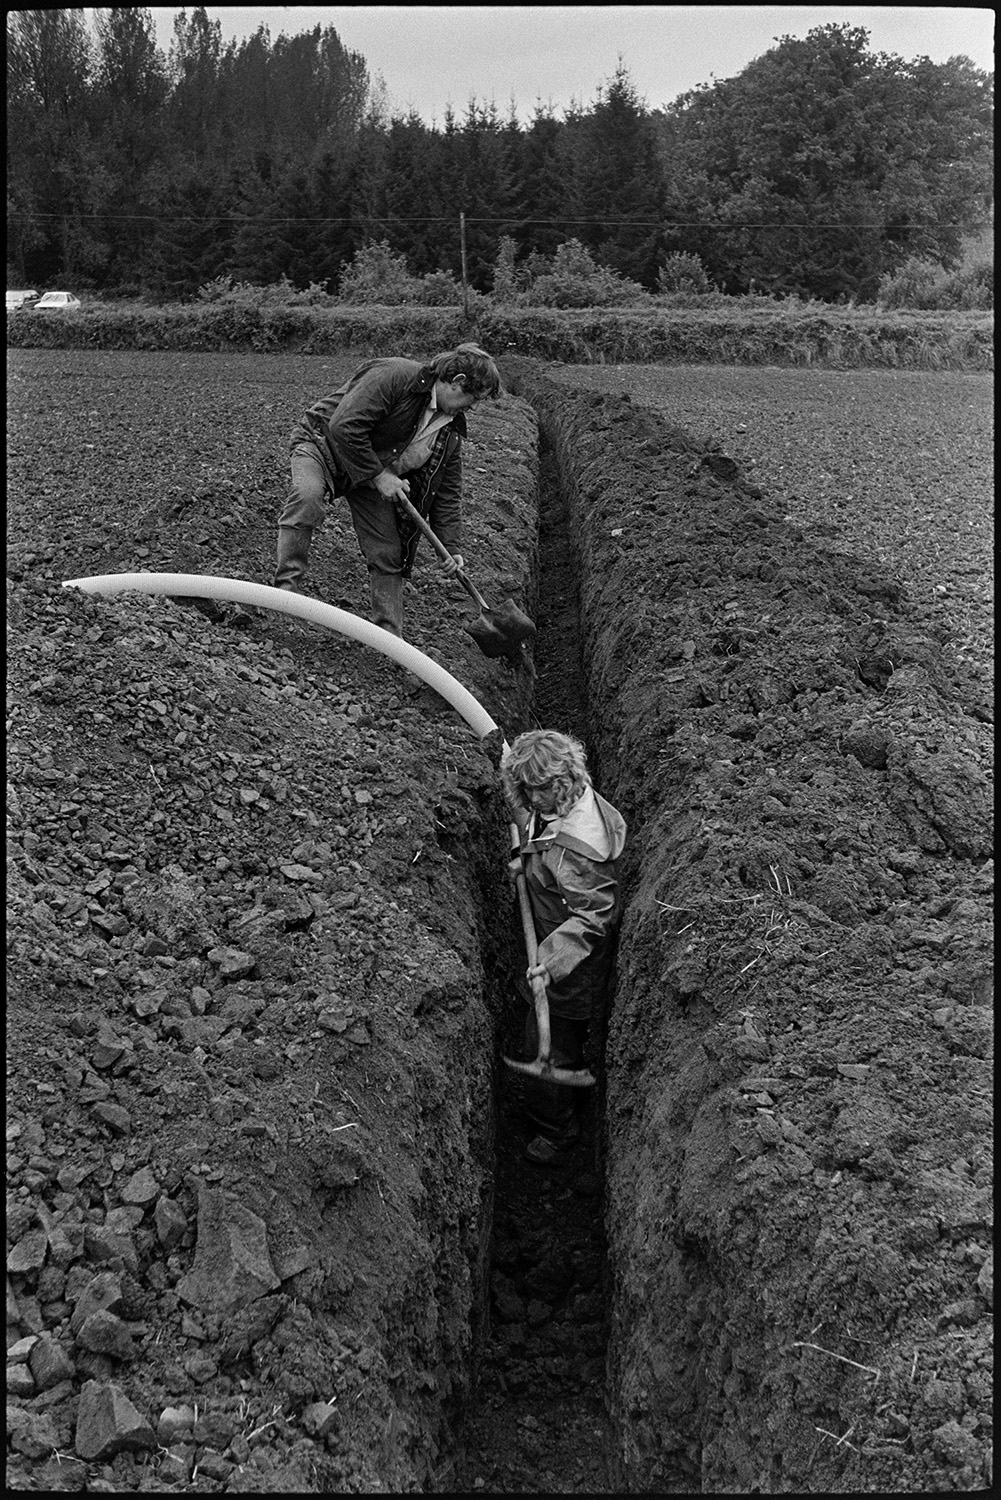 Farmer and daughter, woman, laying drainage pipe in ploughed field, tractor, JCB. 
[Rob Millman and his daughter laying a drainage pipe in a ploughed field near Leigh Cross, Chulmleigh. His daughter is stood in the trench covering the pipe while he shovels earth into the trench.]